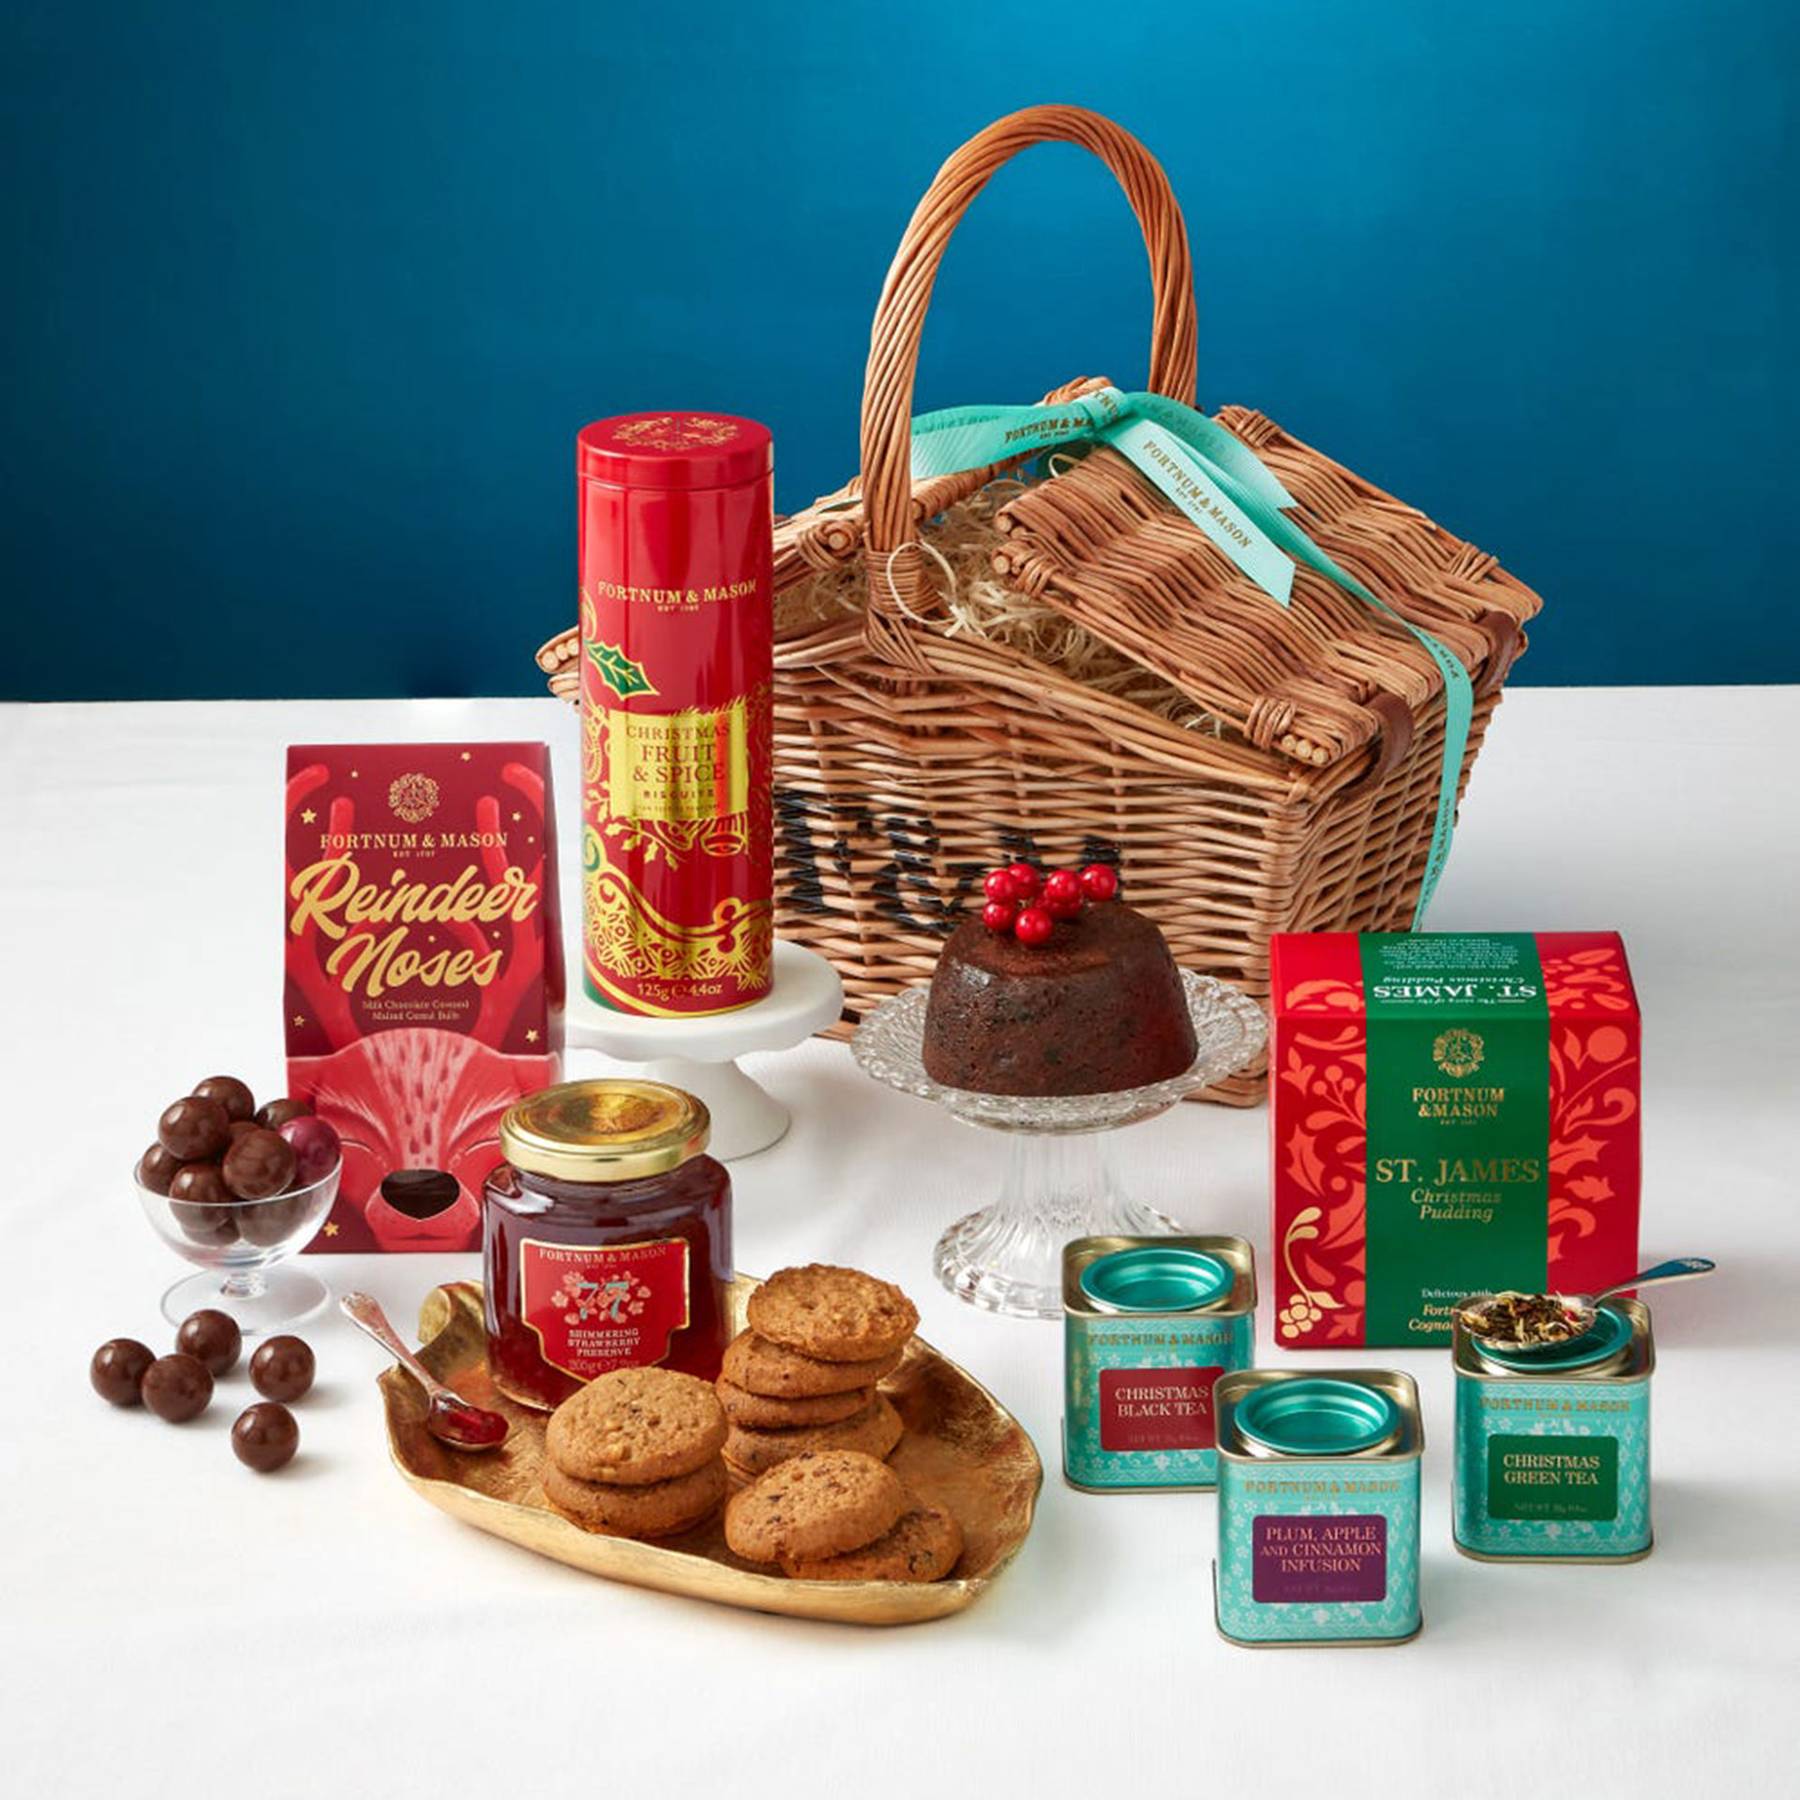 27 Best Christmas Hampers for 2020 Selfridges, The White Company, M&S